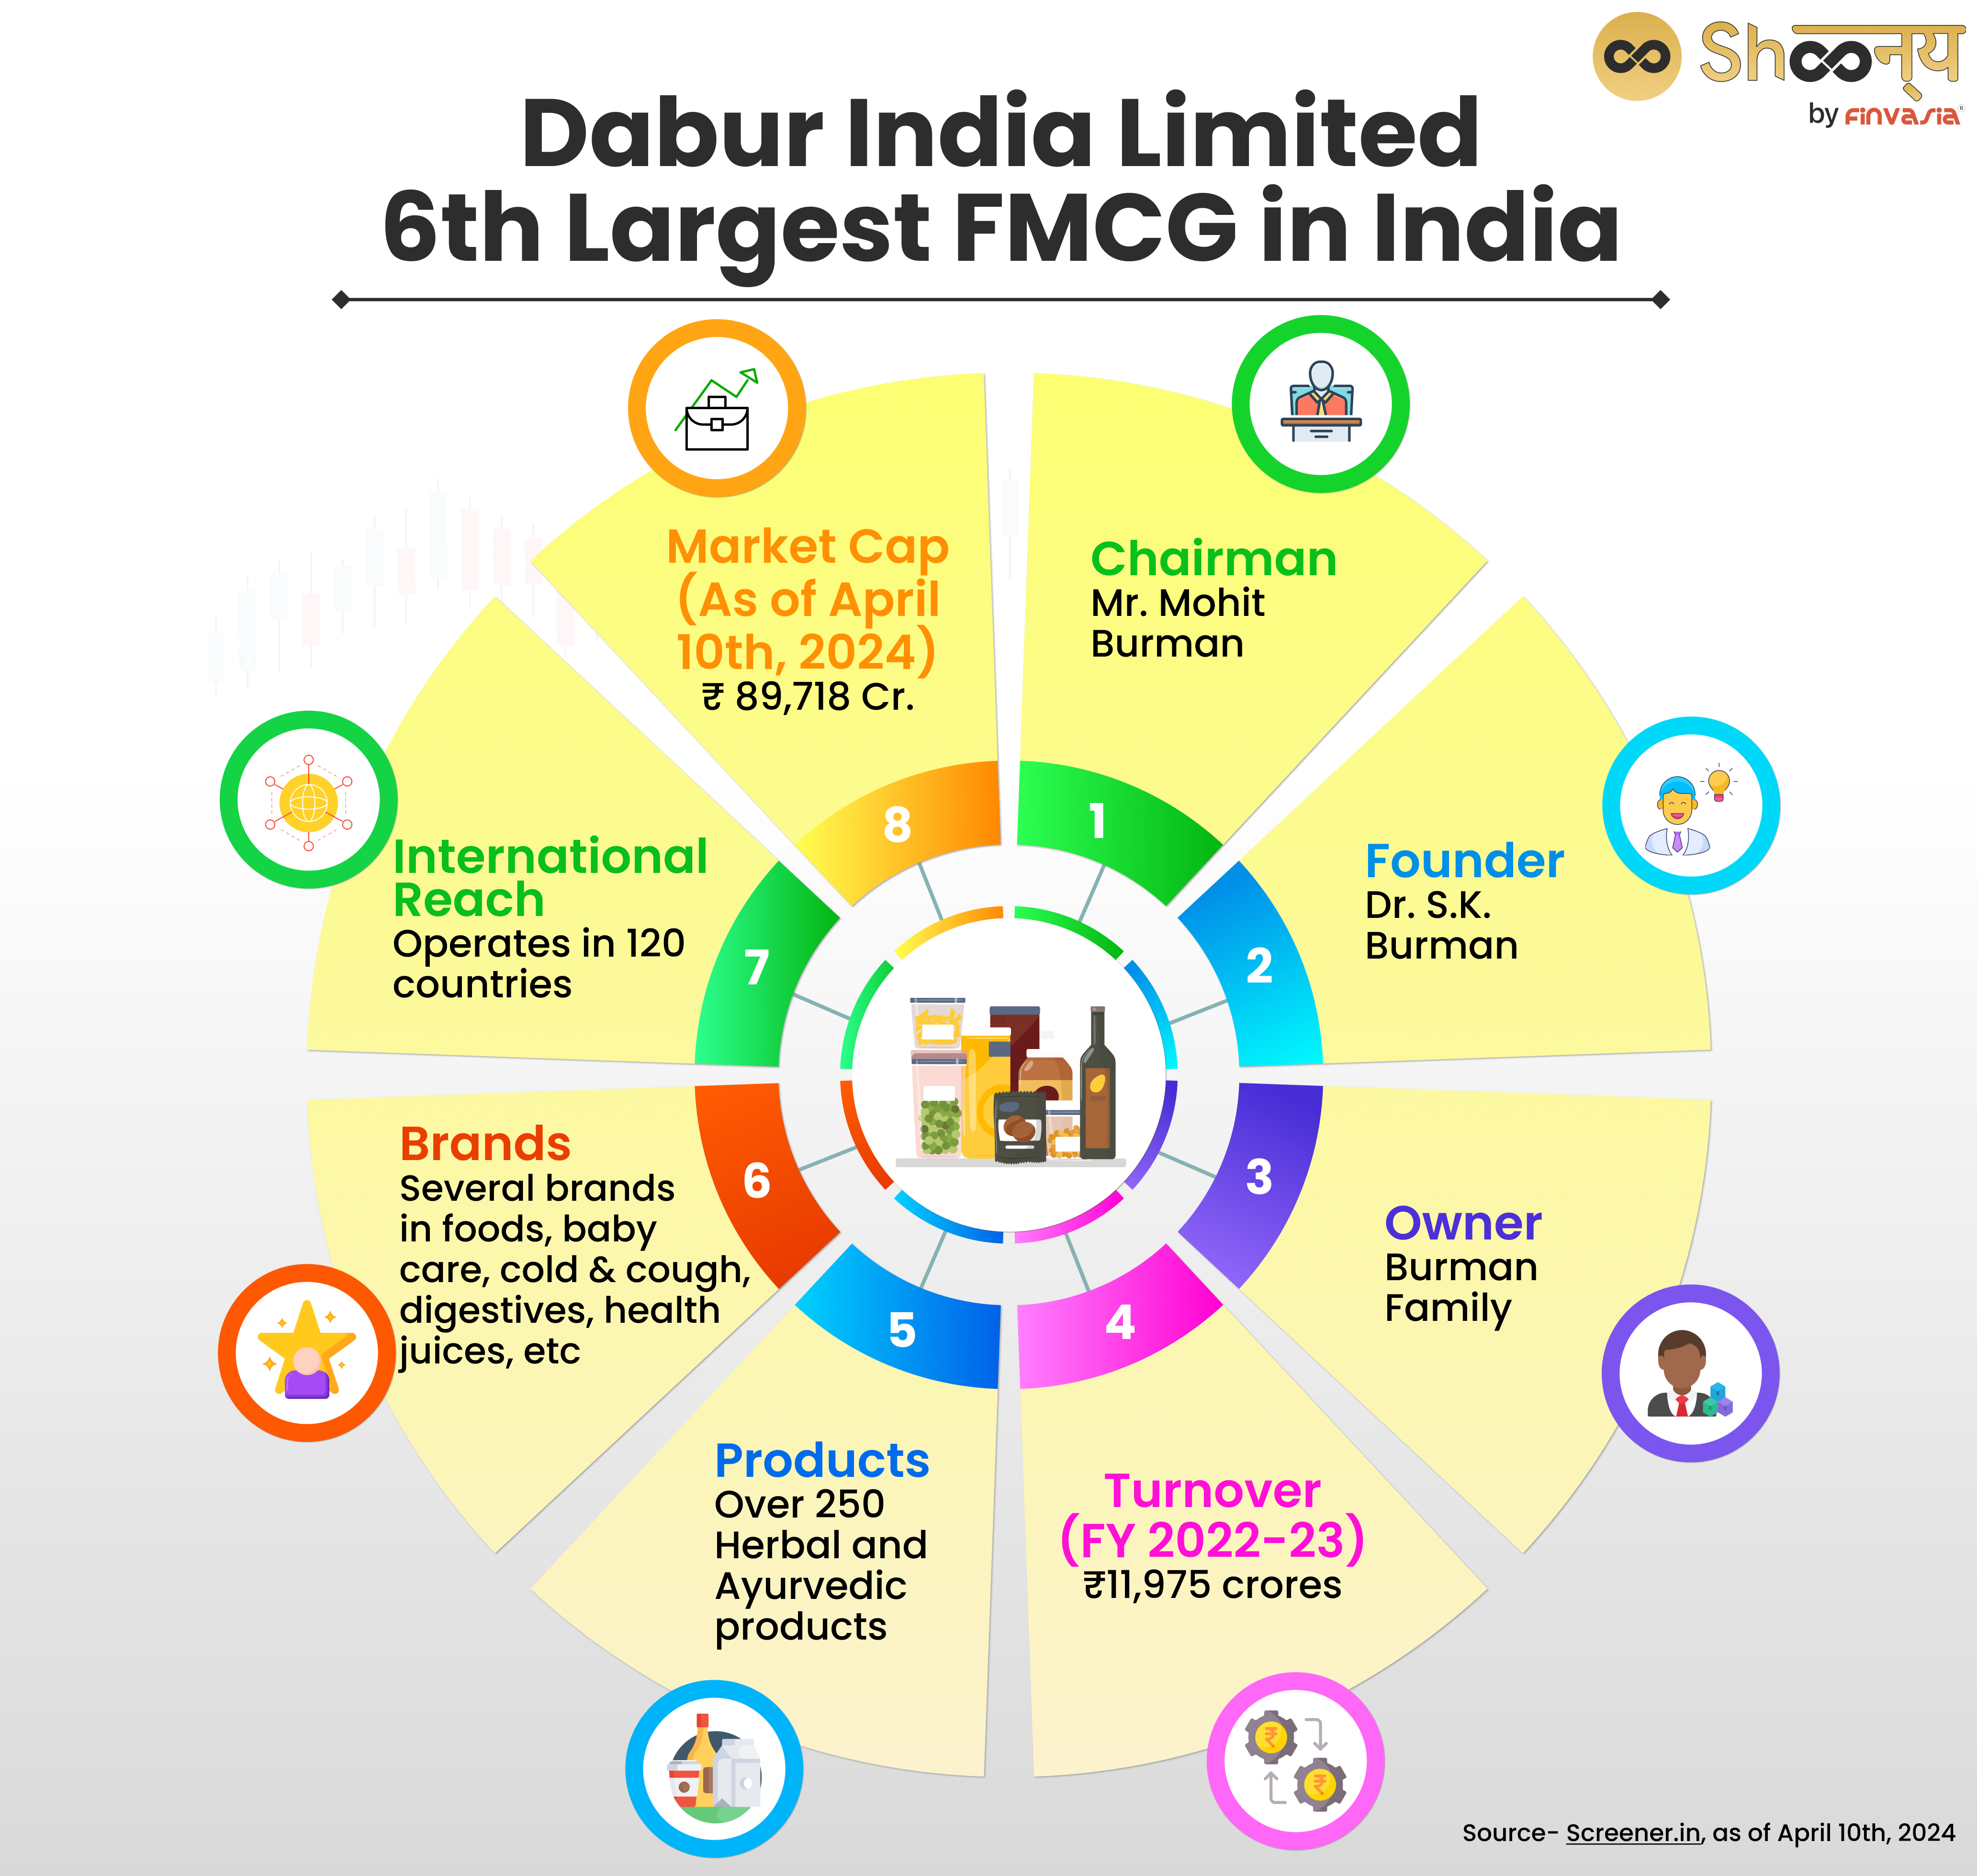 Dabur India Limited: 6th Largest FMCG in India